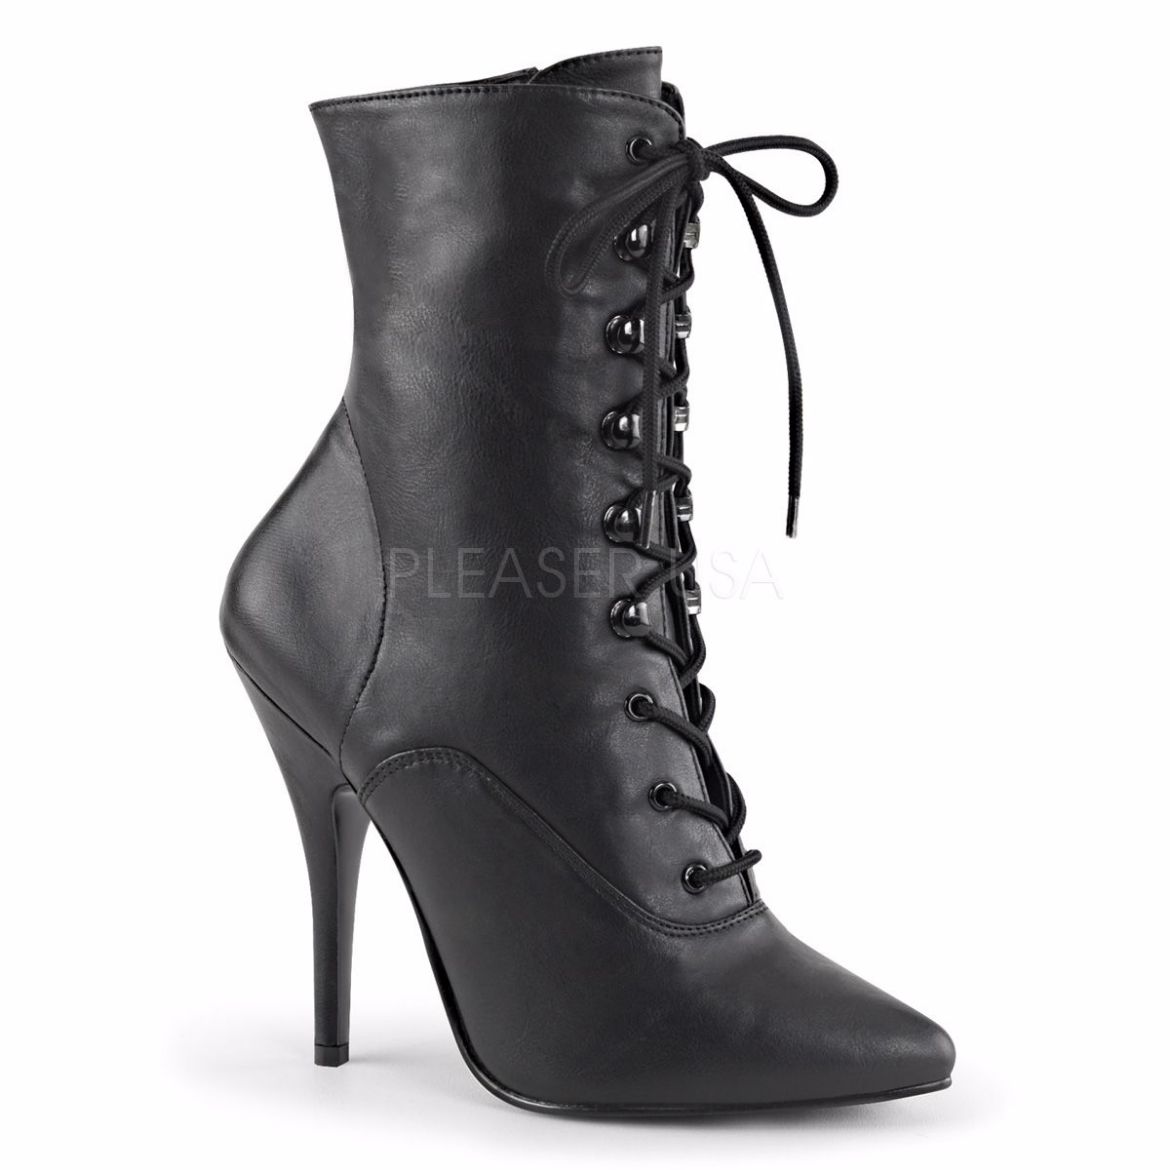 Product image of Pleaser Seduce-1020 Black Faux Leather, 5 inch (12.7 cm) Heel Ankle Boot